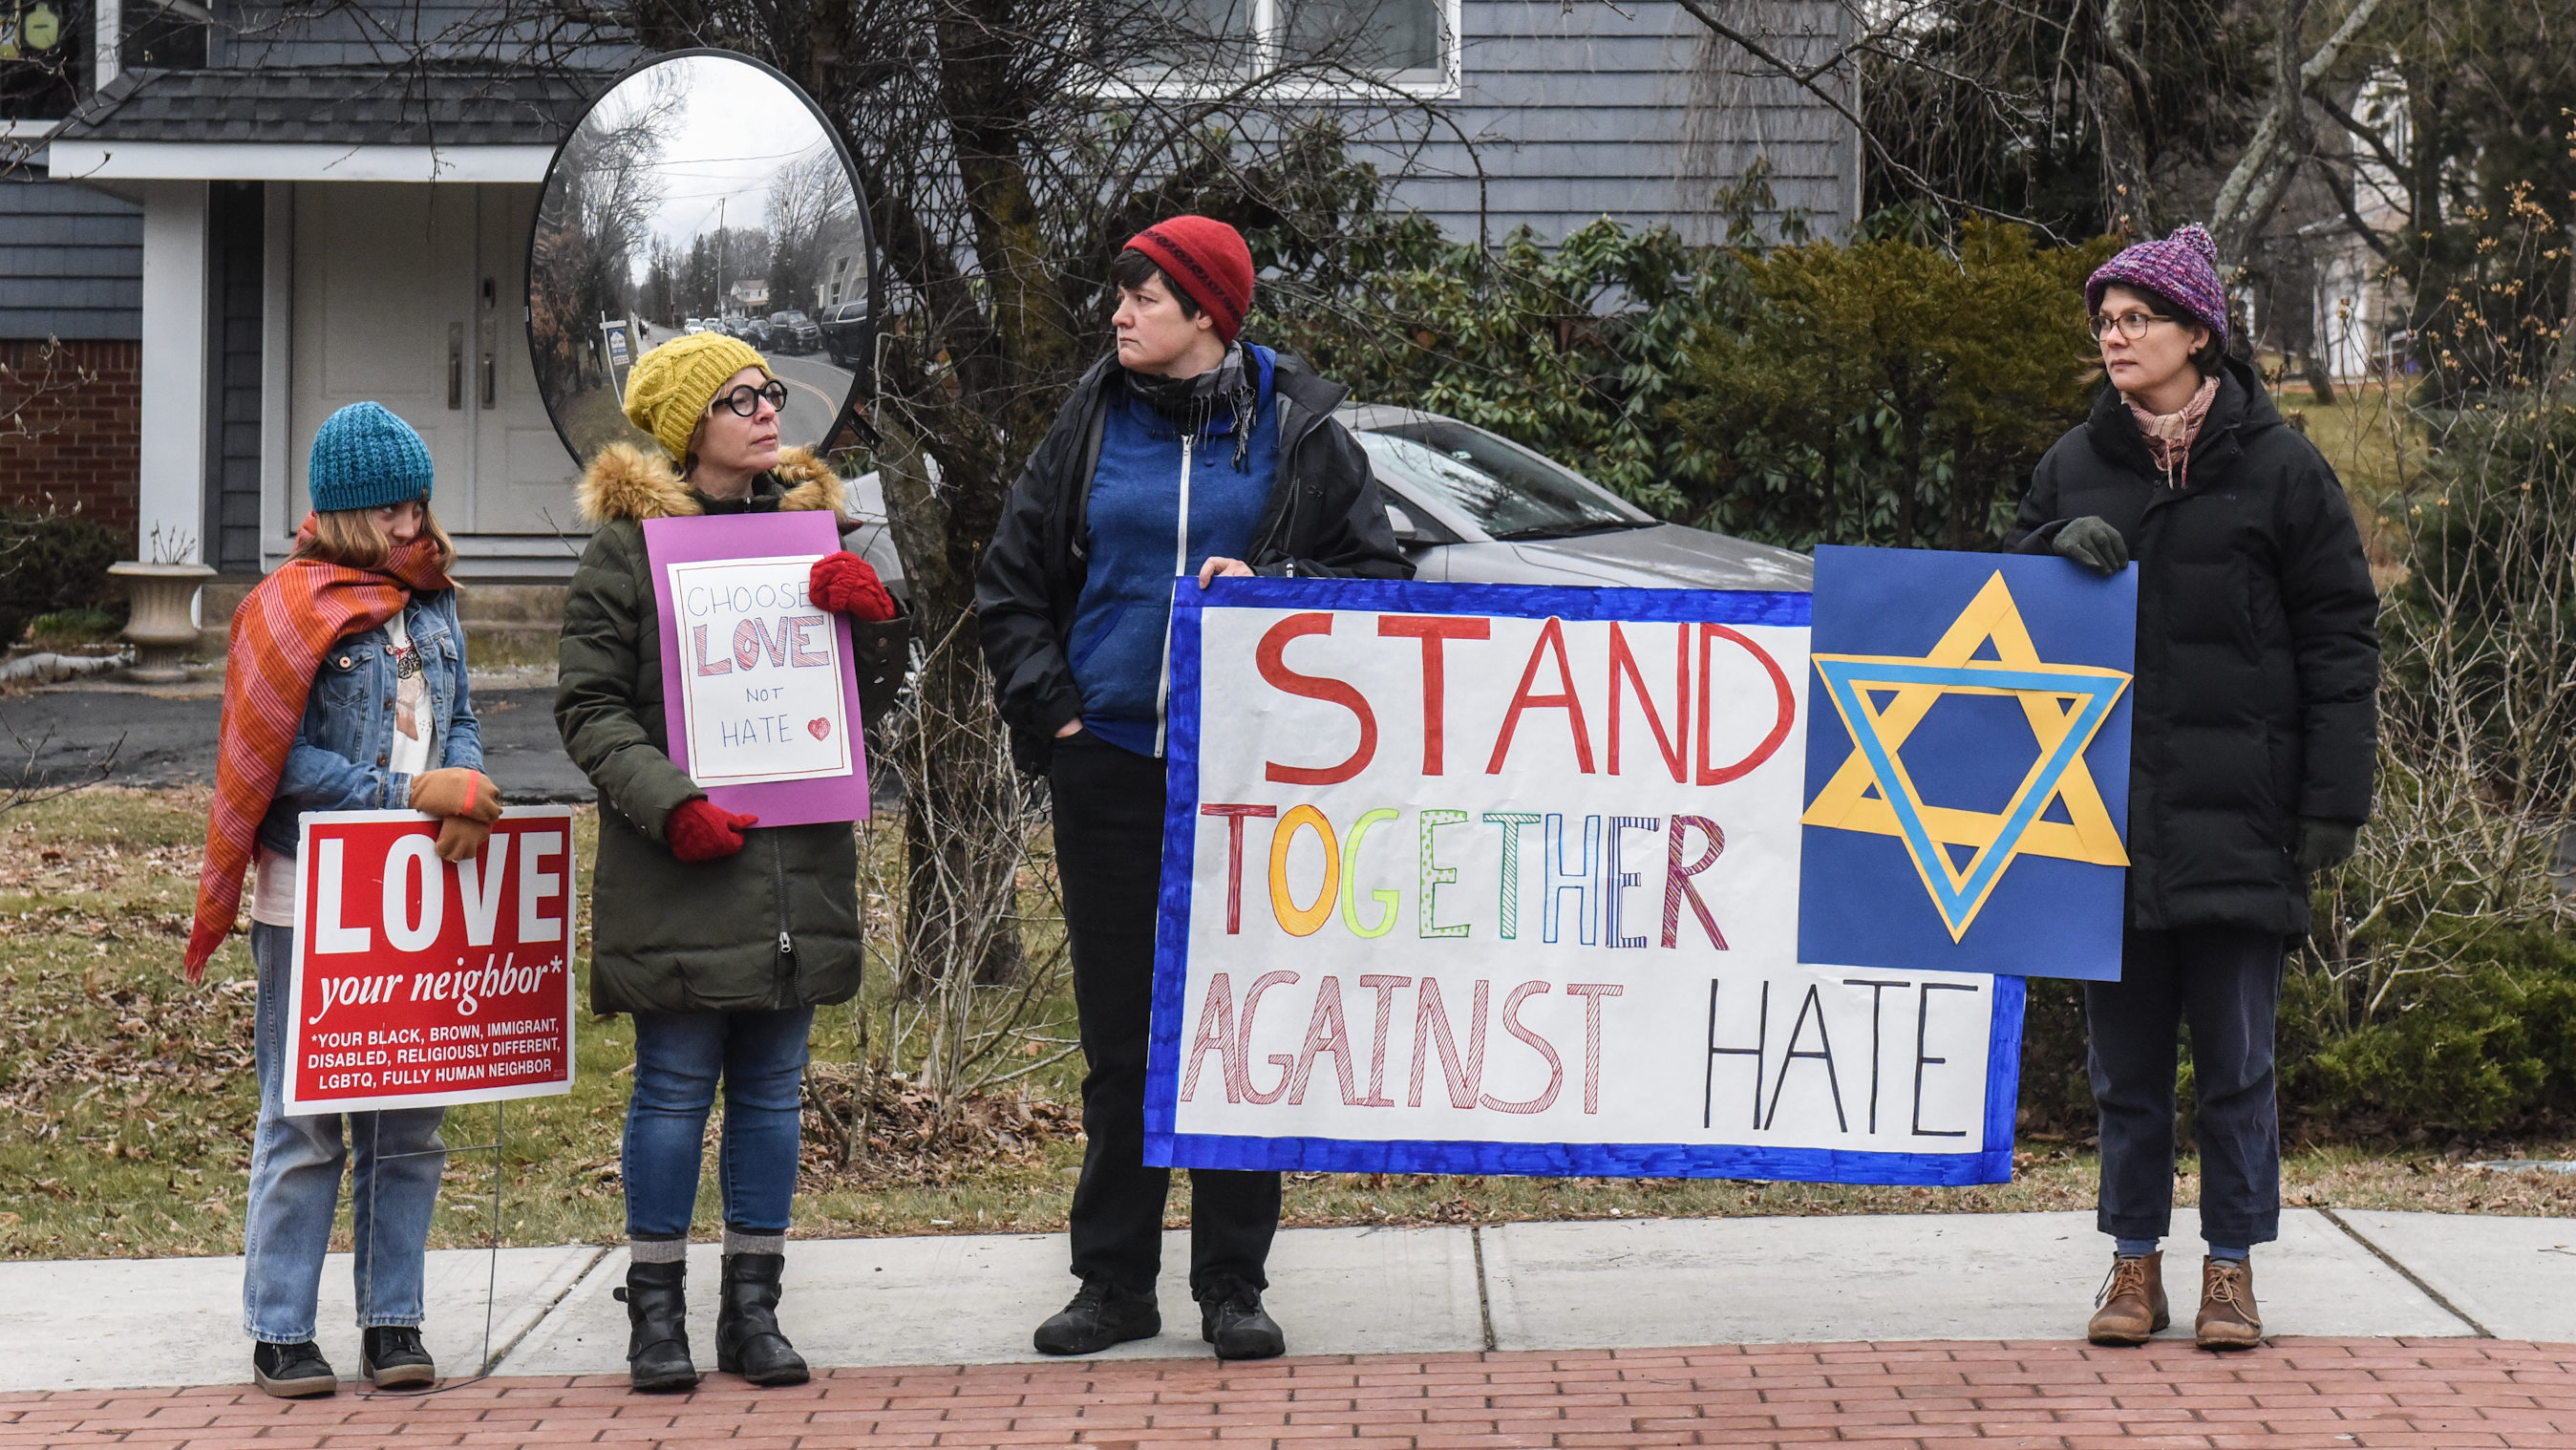 Lessons from 2019’s Top 10 Anti-Semitic and Anti-Israel Incidents